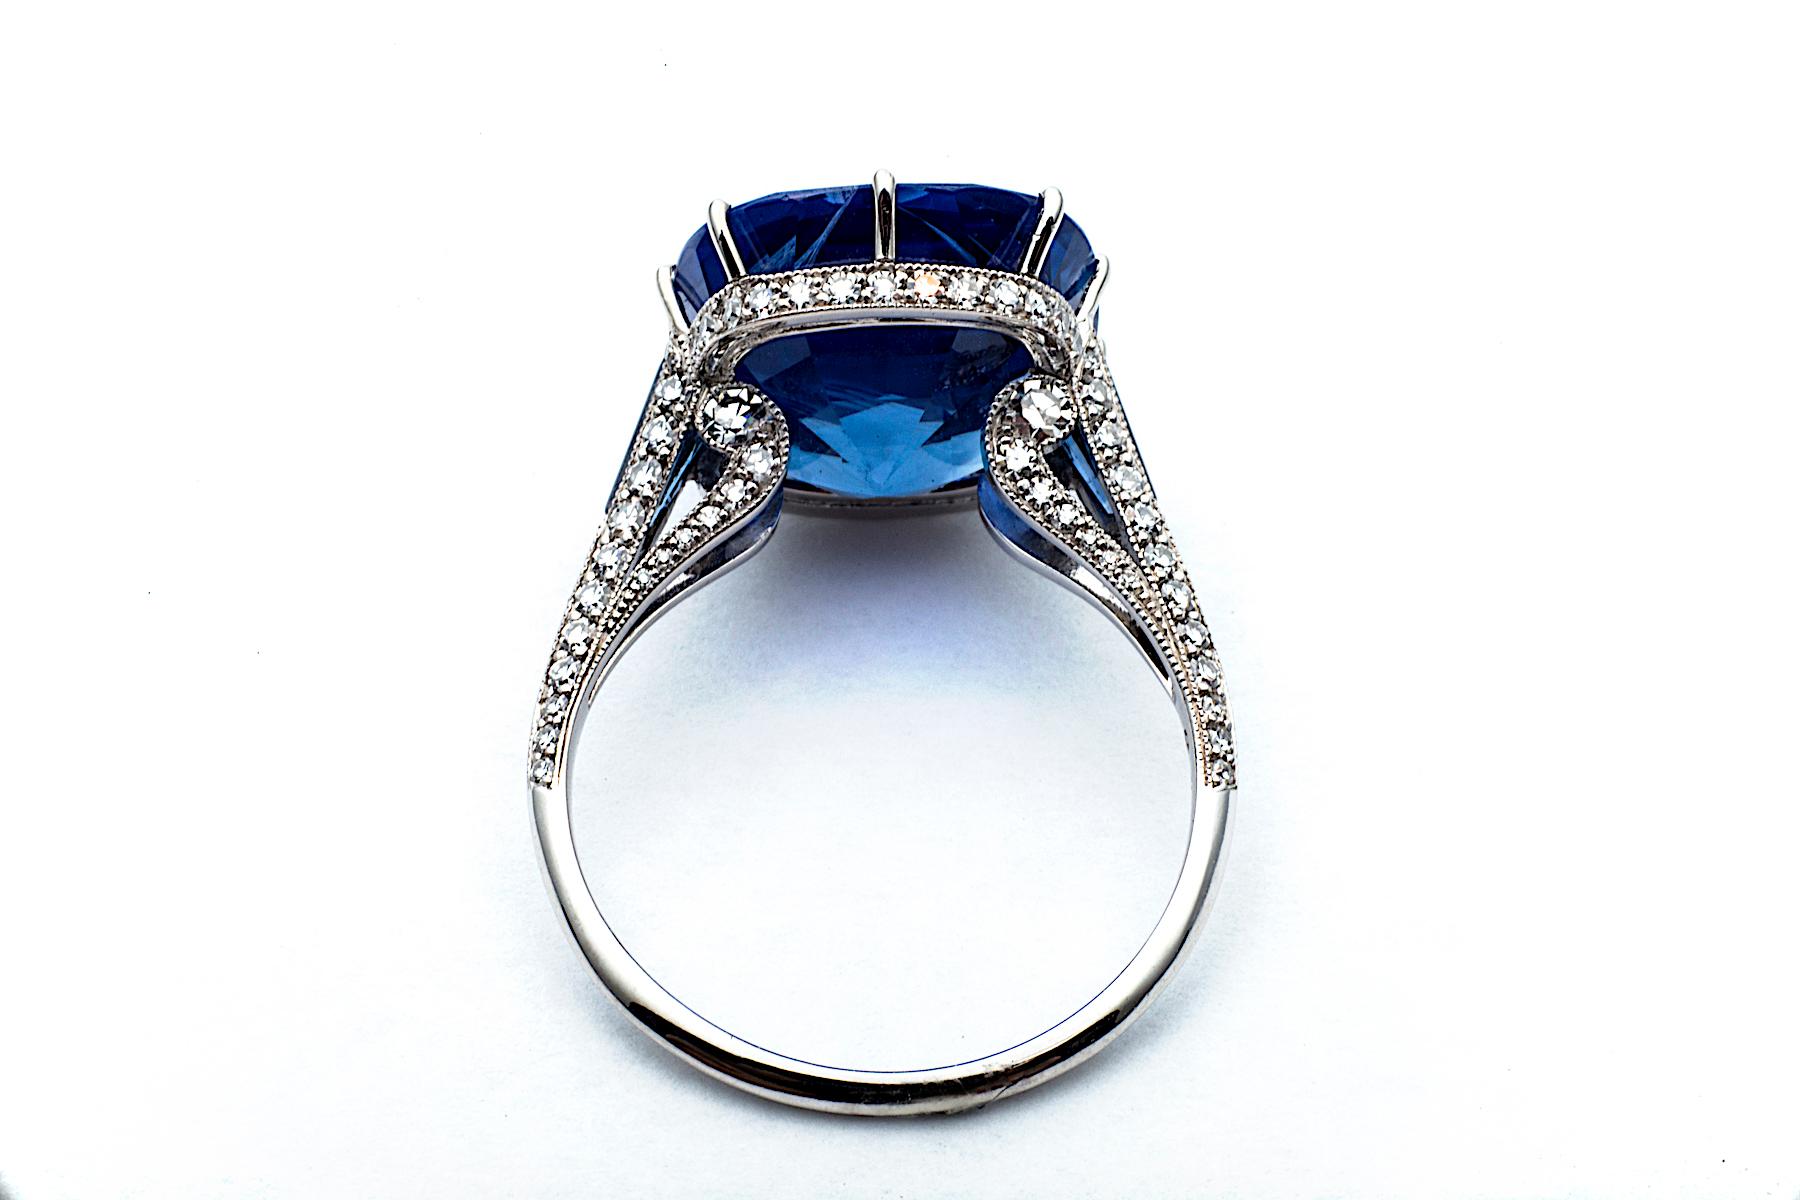 With a regal deep velvet blue color, this extraordinary vivid sapphire is fit for a Queen.  The one-of-a-kind 9.33 carat antique cushion cut natural sapphire is set in a diamond platinum crown shaped handmade basket, with ten delicate prongs, making